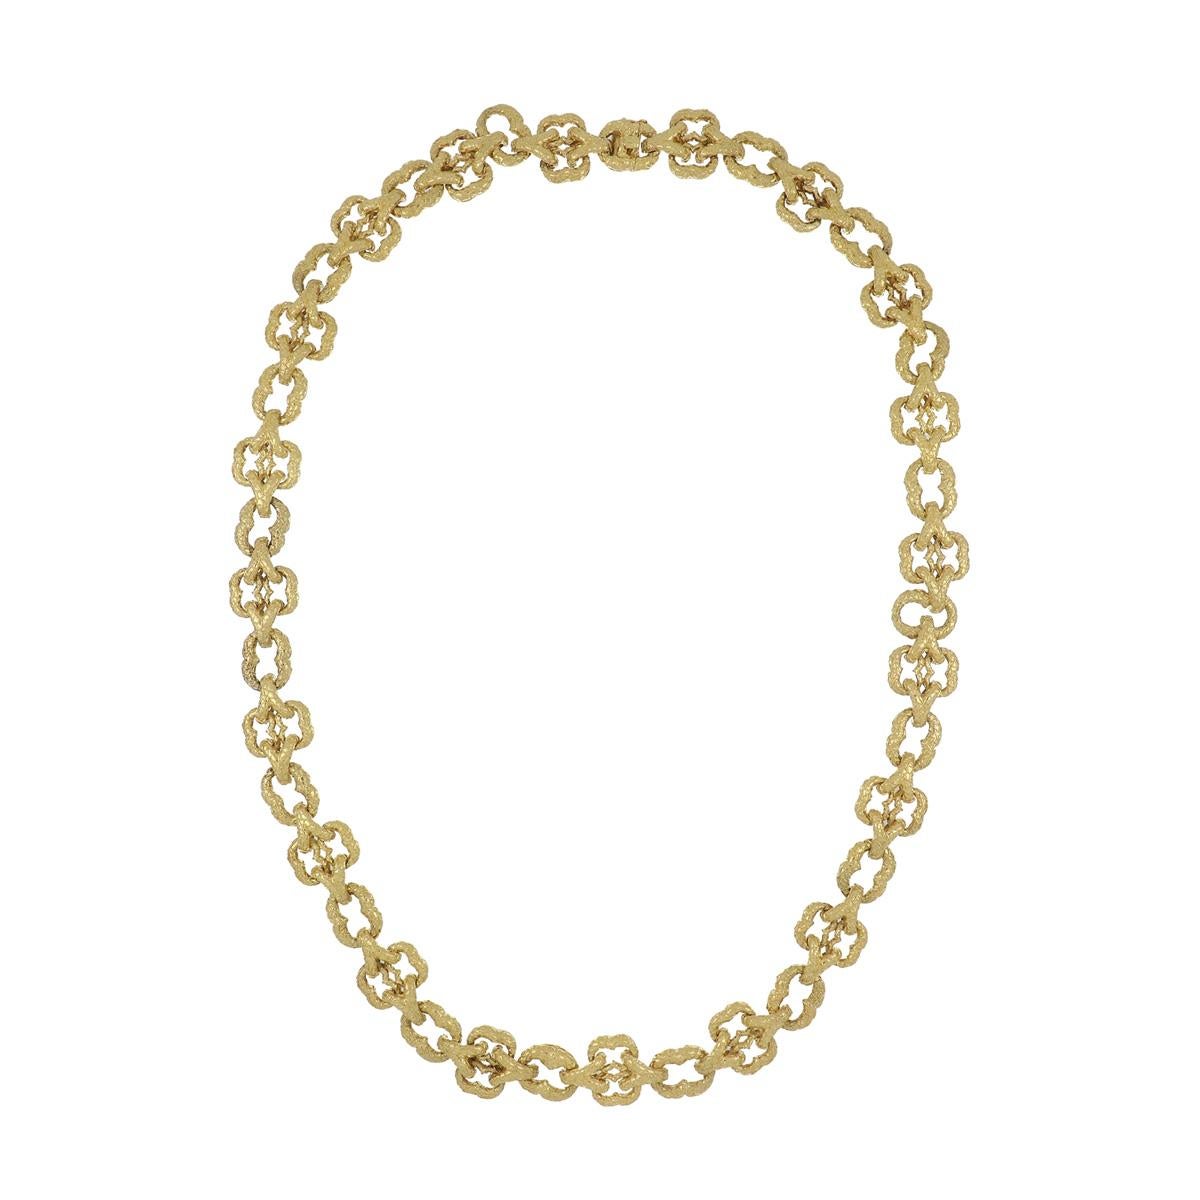 Wander heavy link necklace in 18K textured yellow gold that measures 29 inches in length.